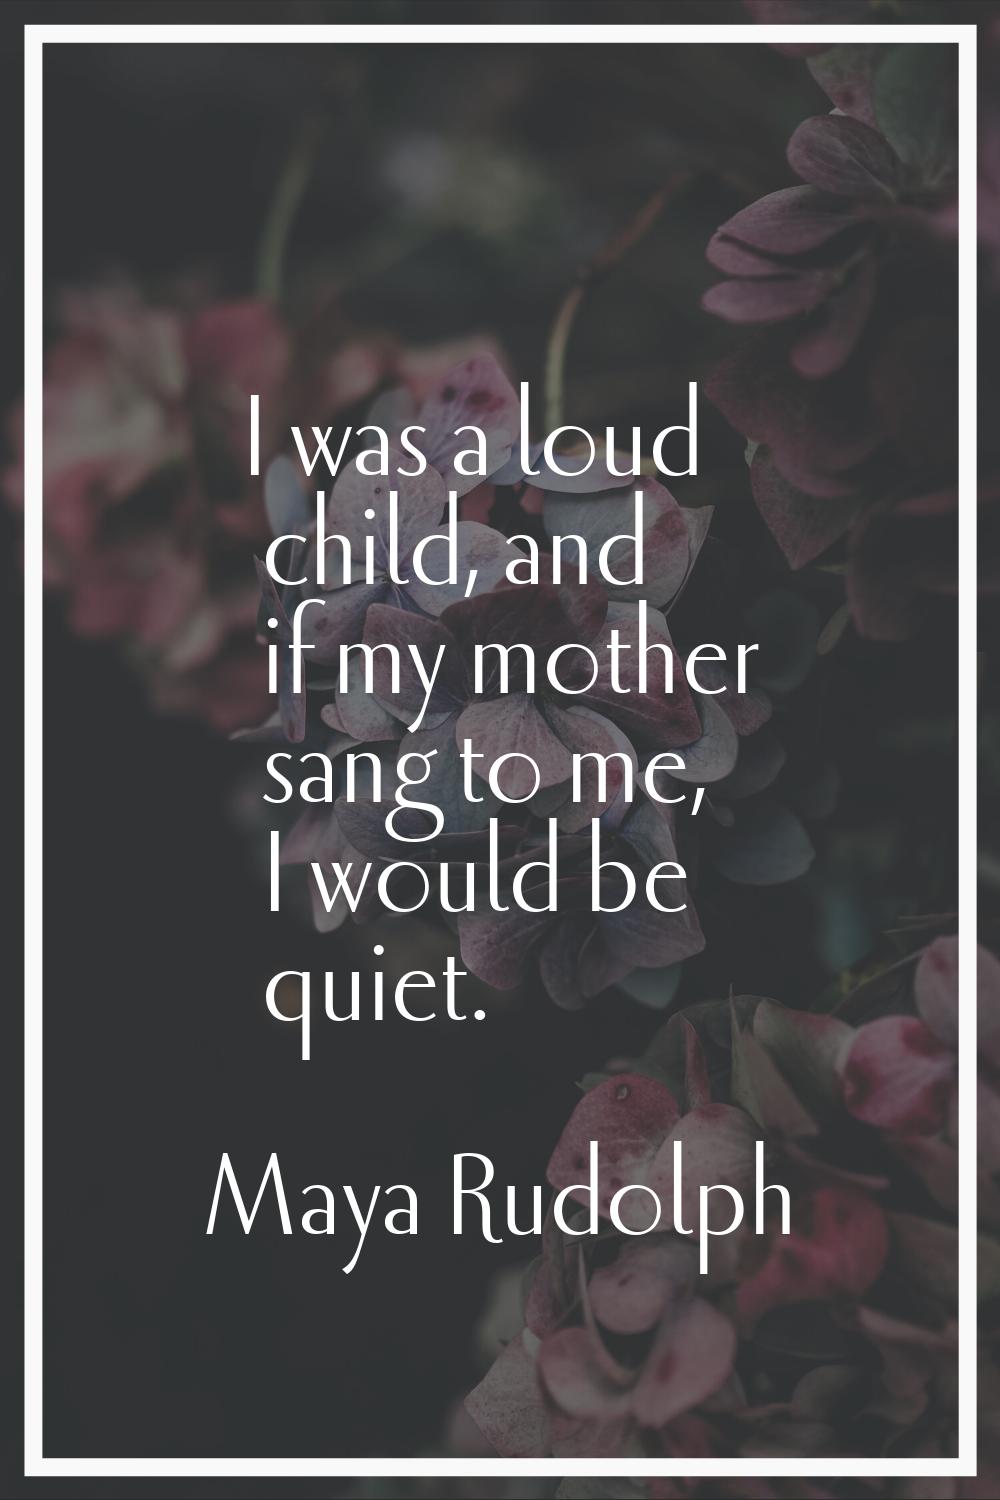 I was a loud child, and if my mother sang to me, I would be quiet.